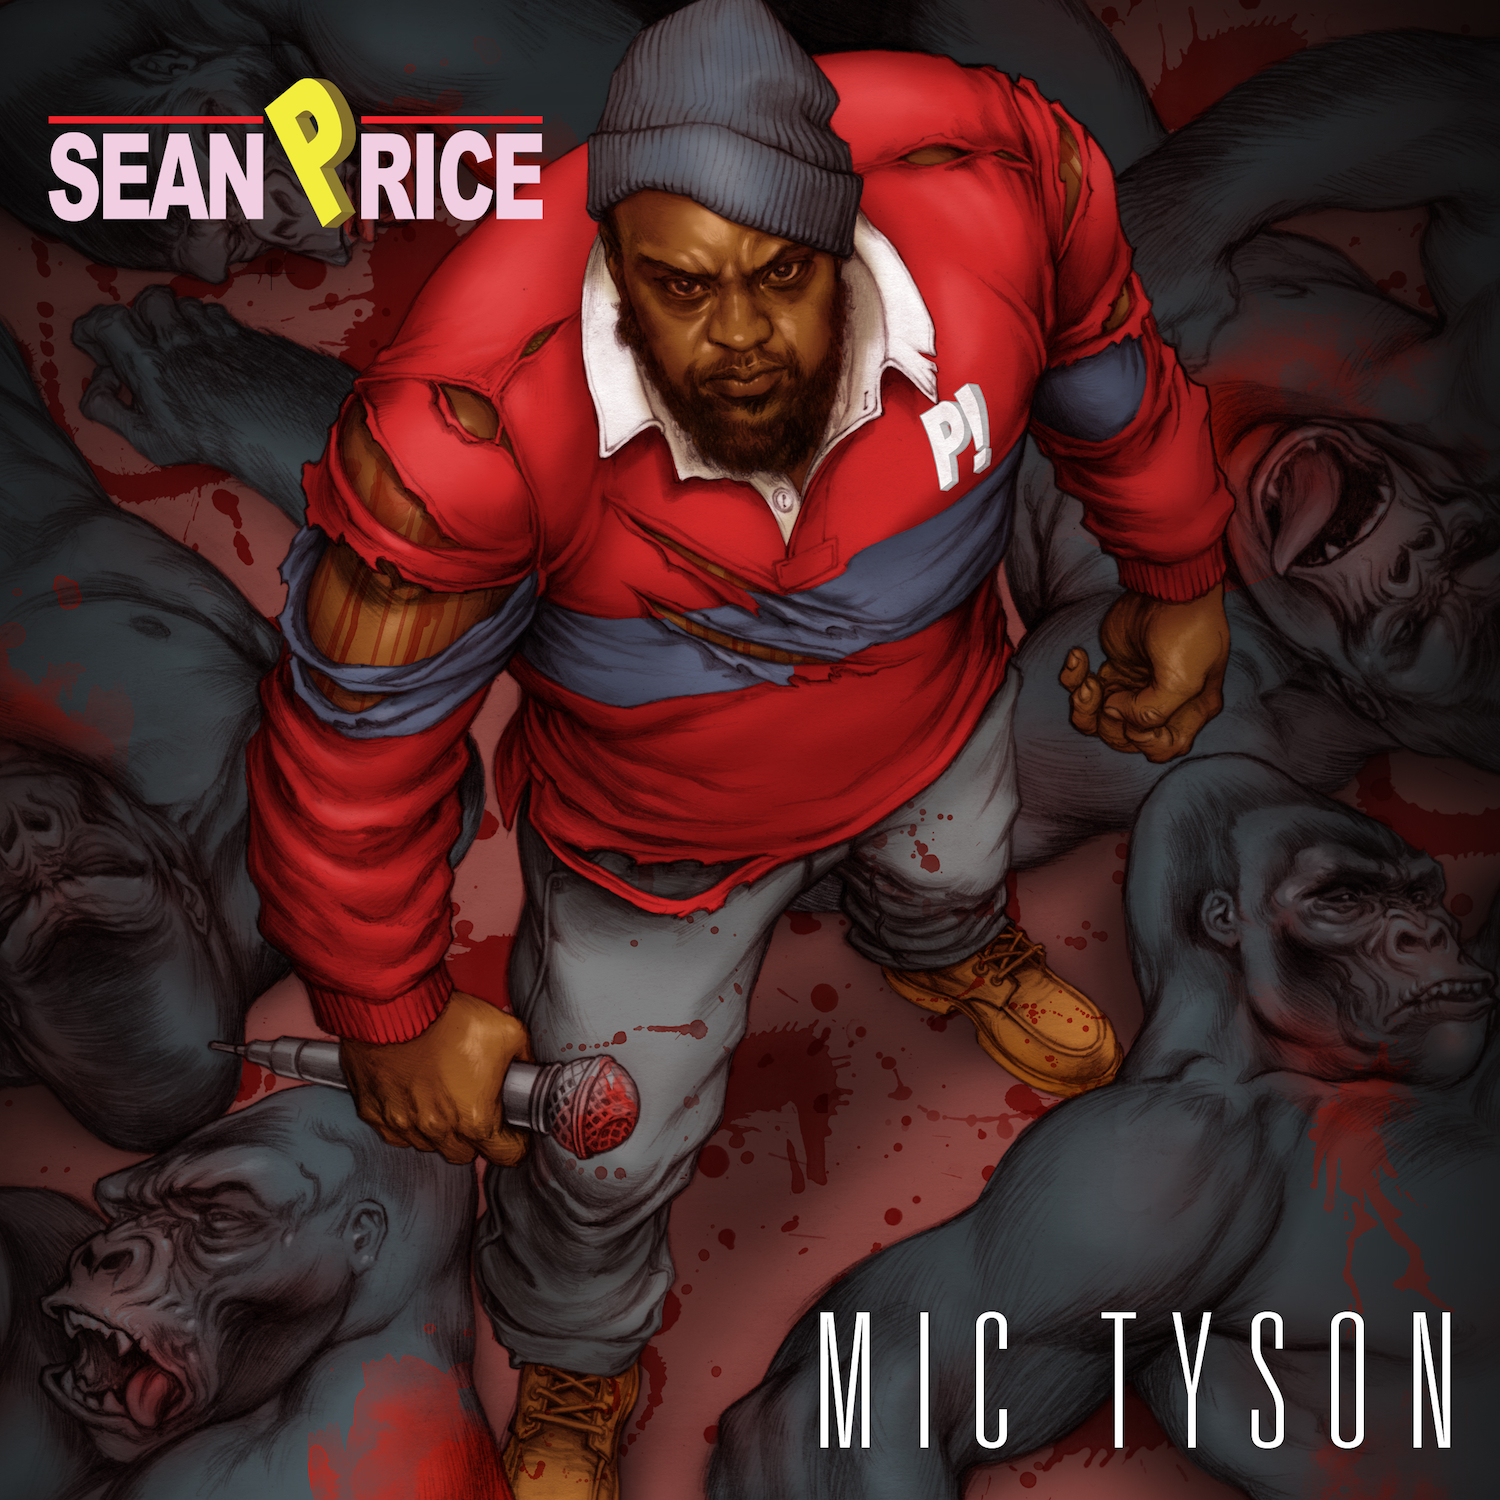 Listen To A Preview of Sean Price's "Mic Tyson" (Video)